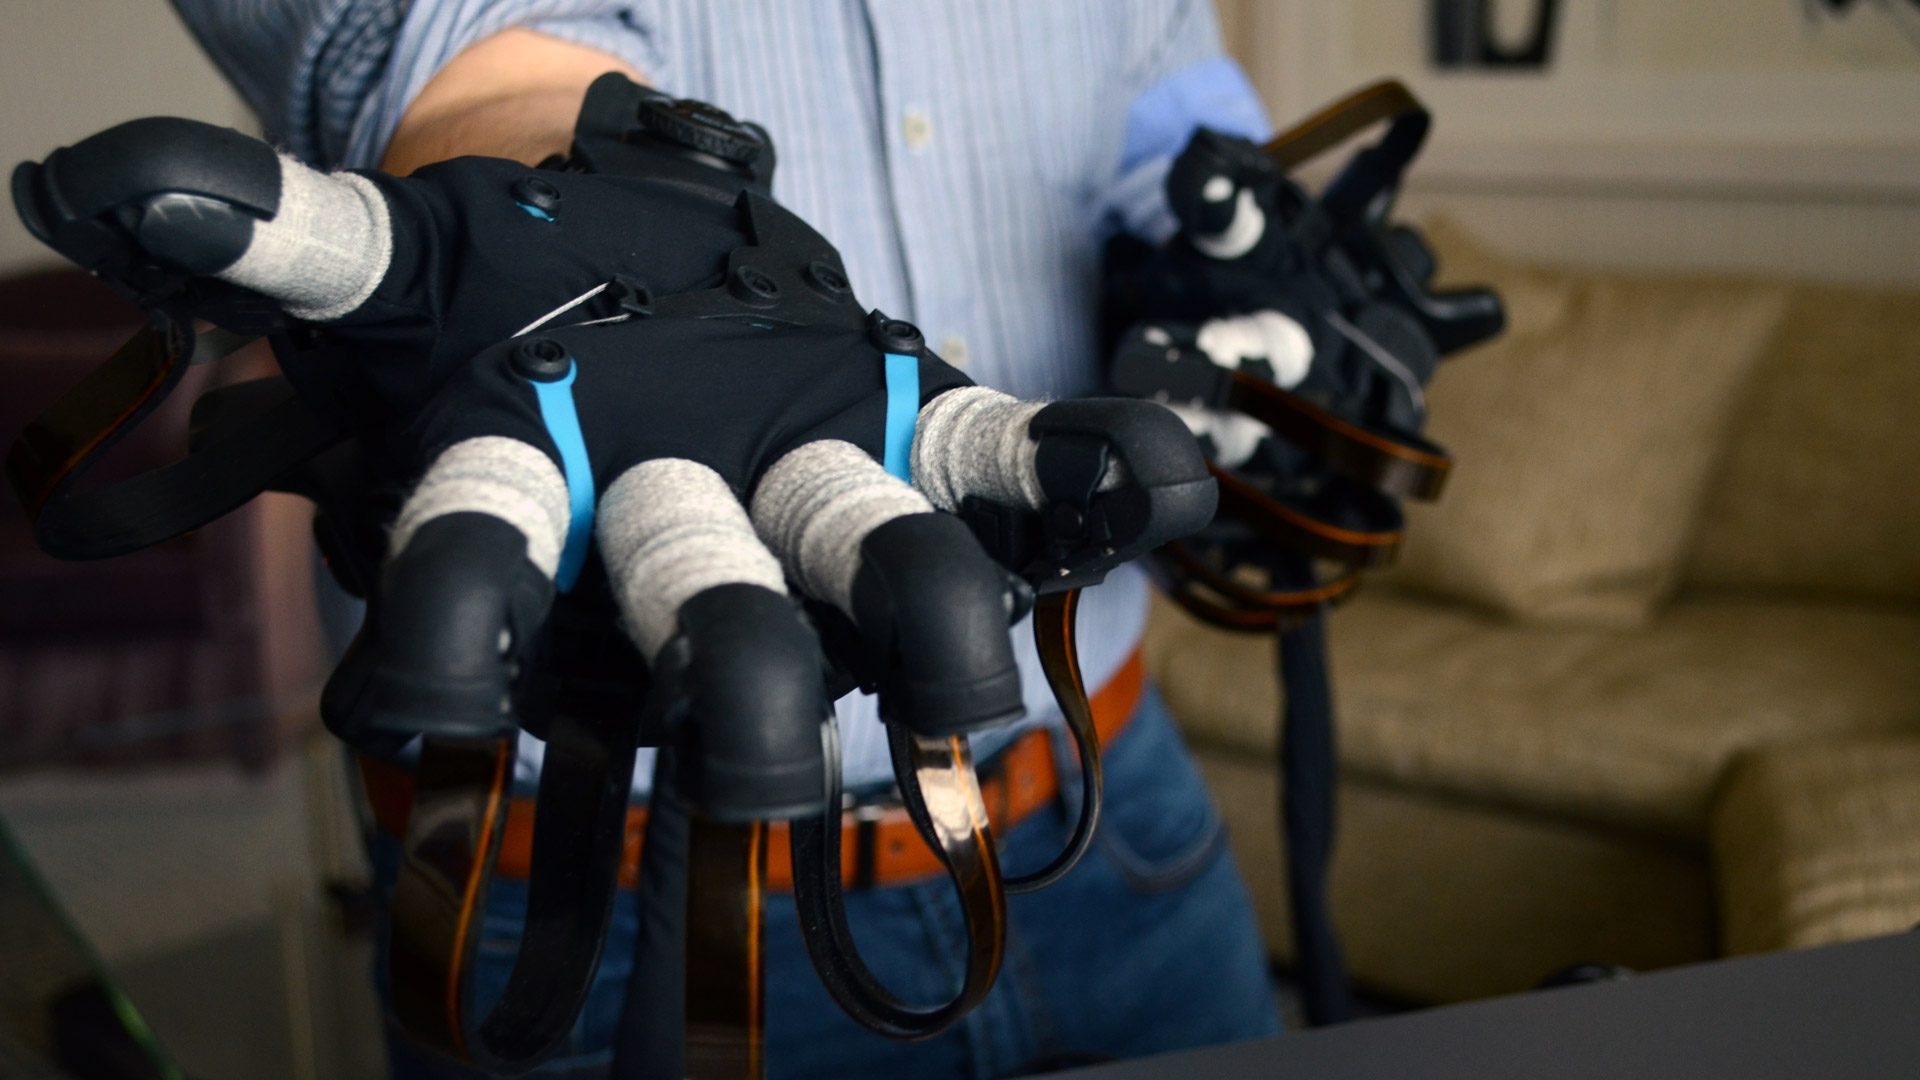 HaptX's Glove the Closest Come to Touching the Virtual World